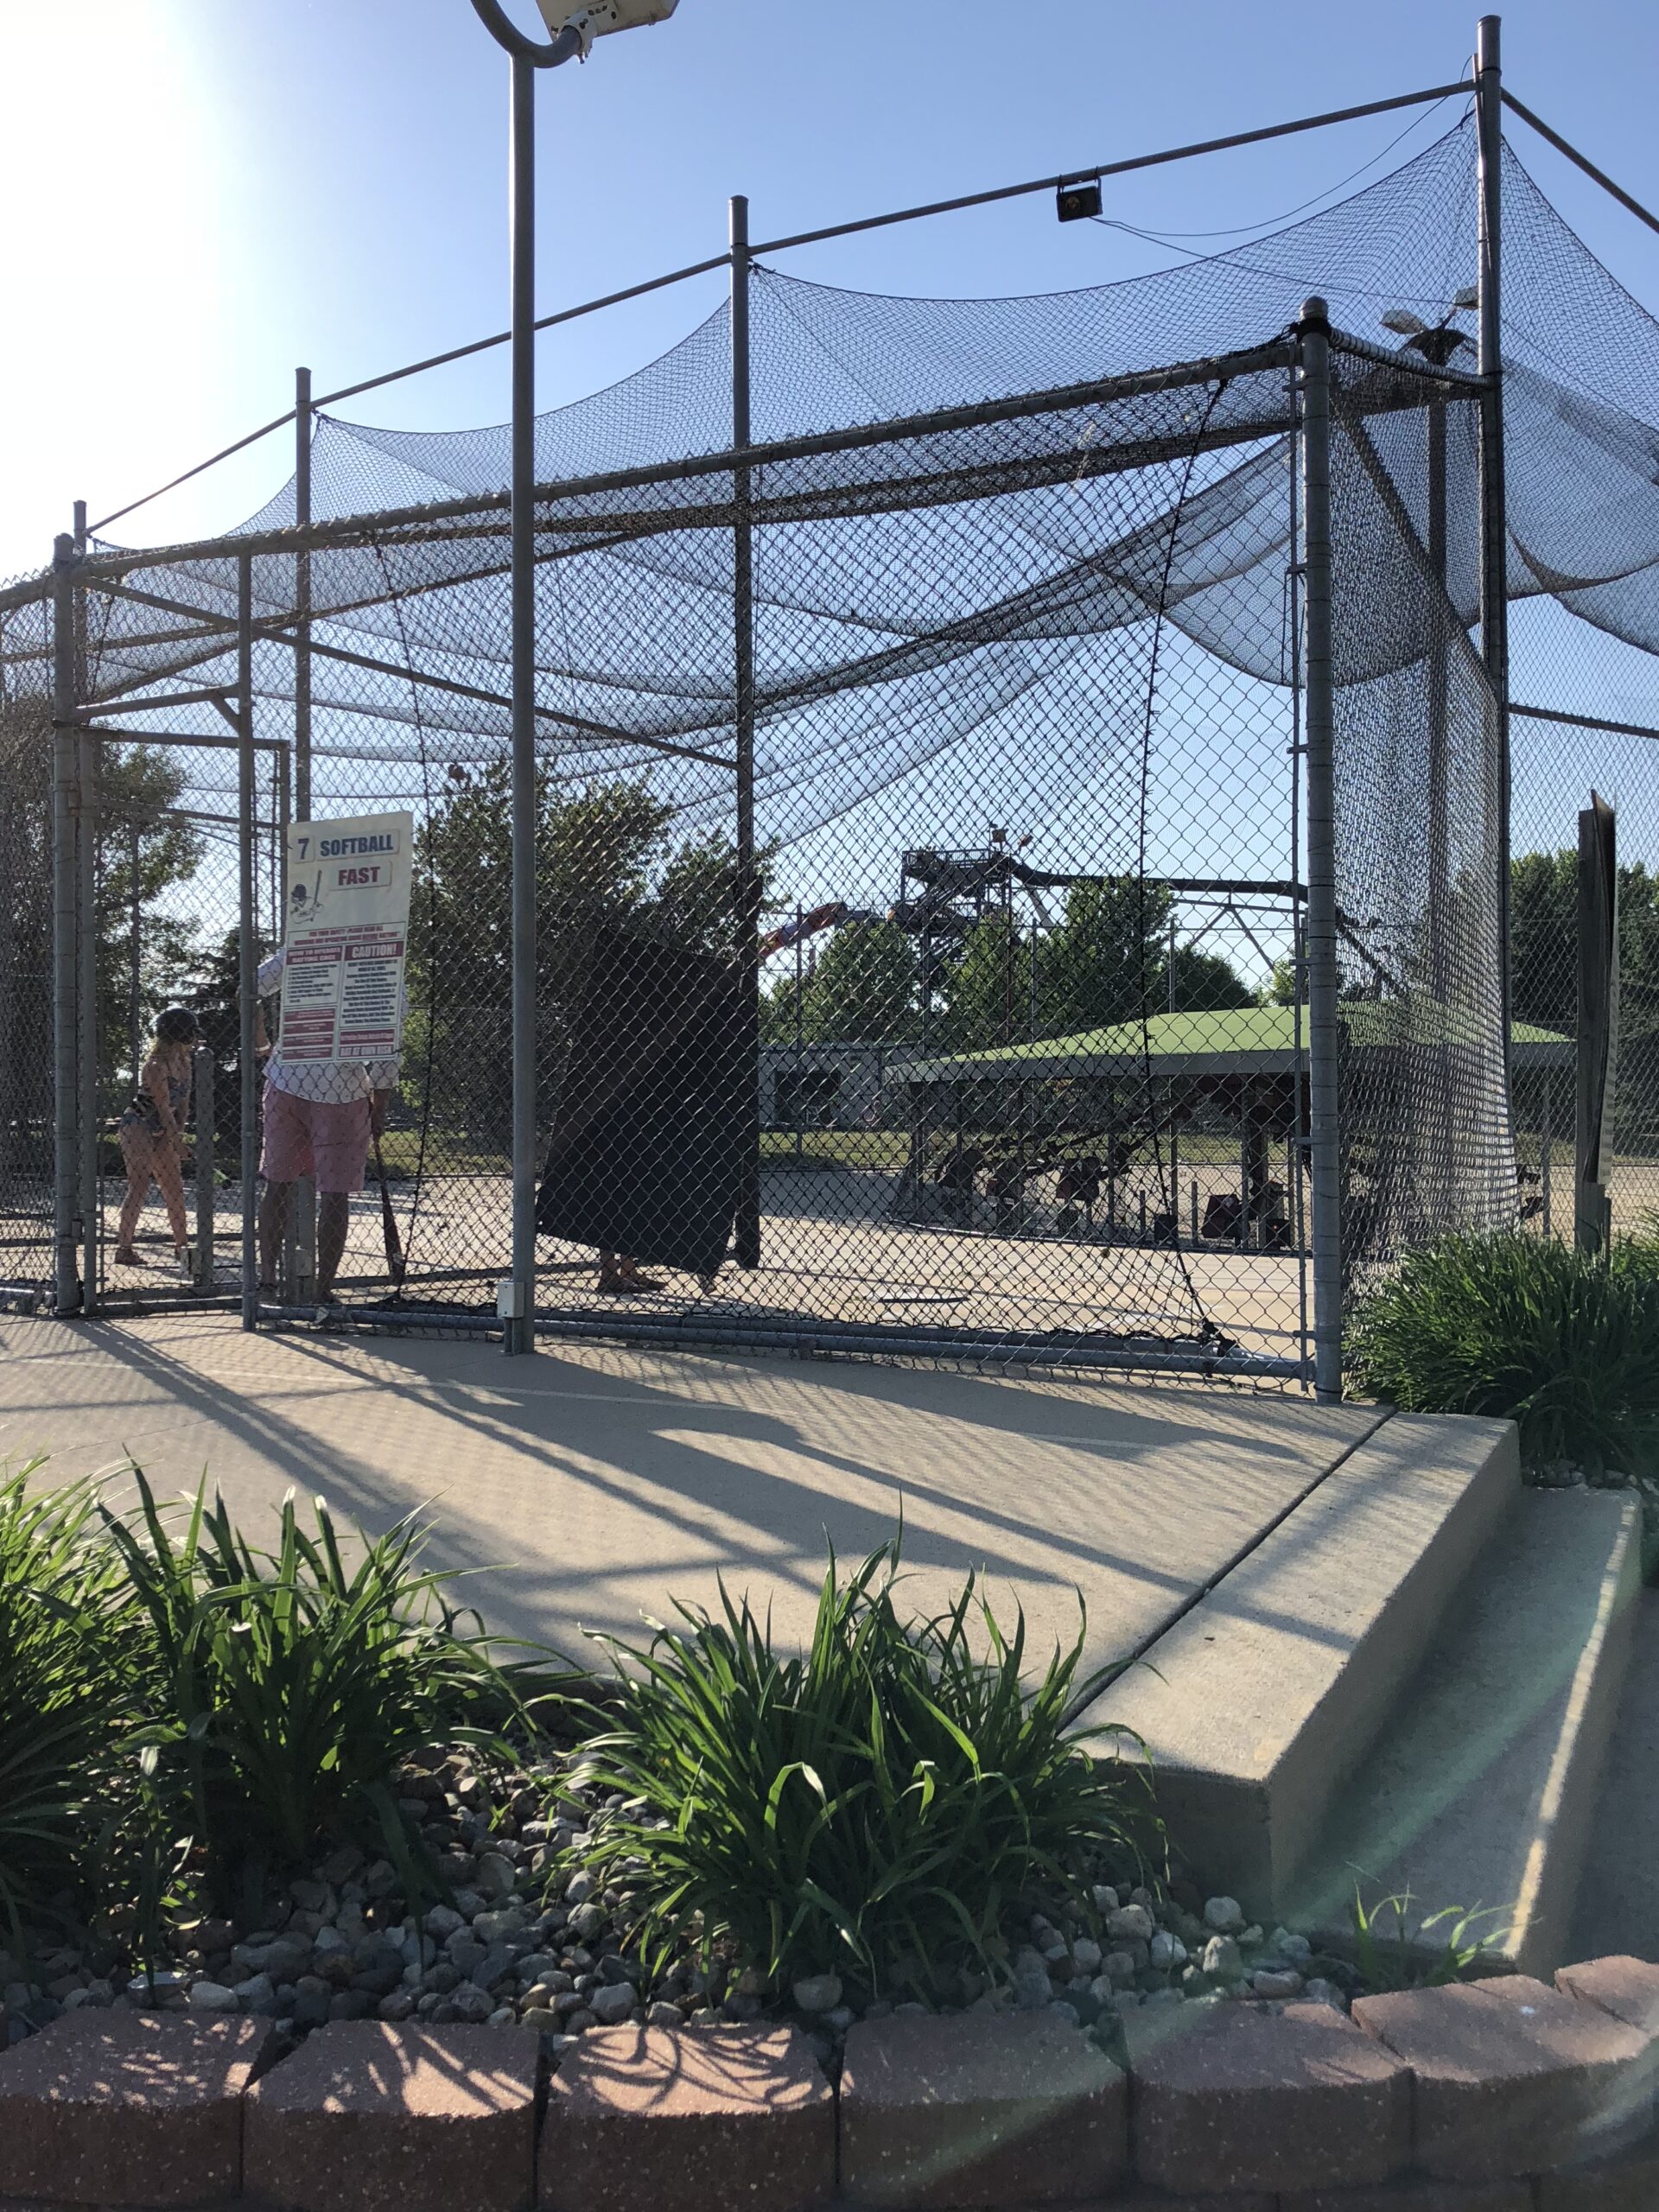 Batting Cages — Out of Order!